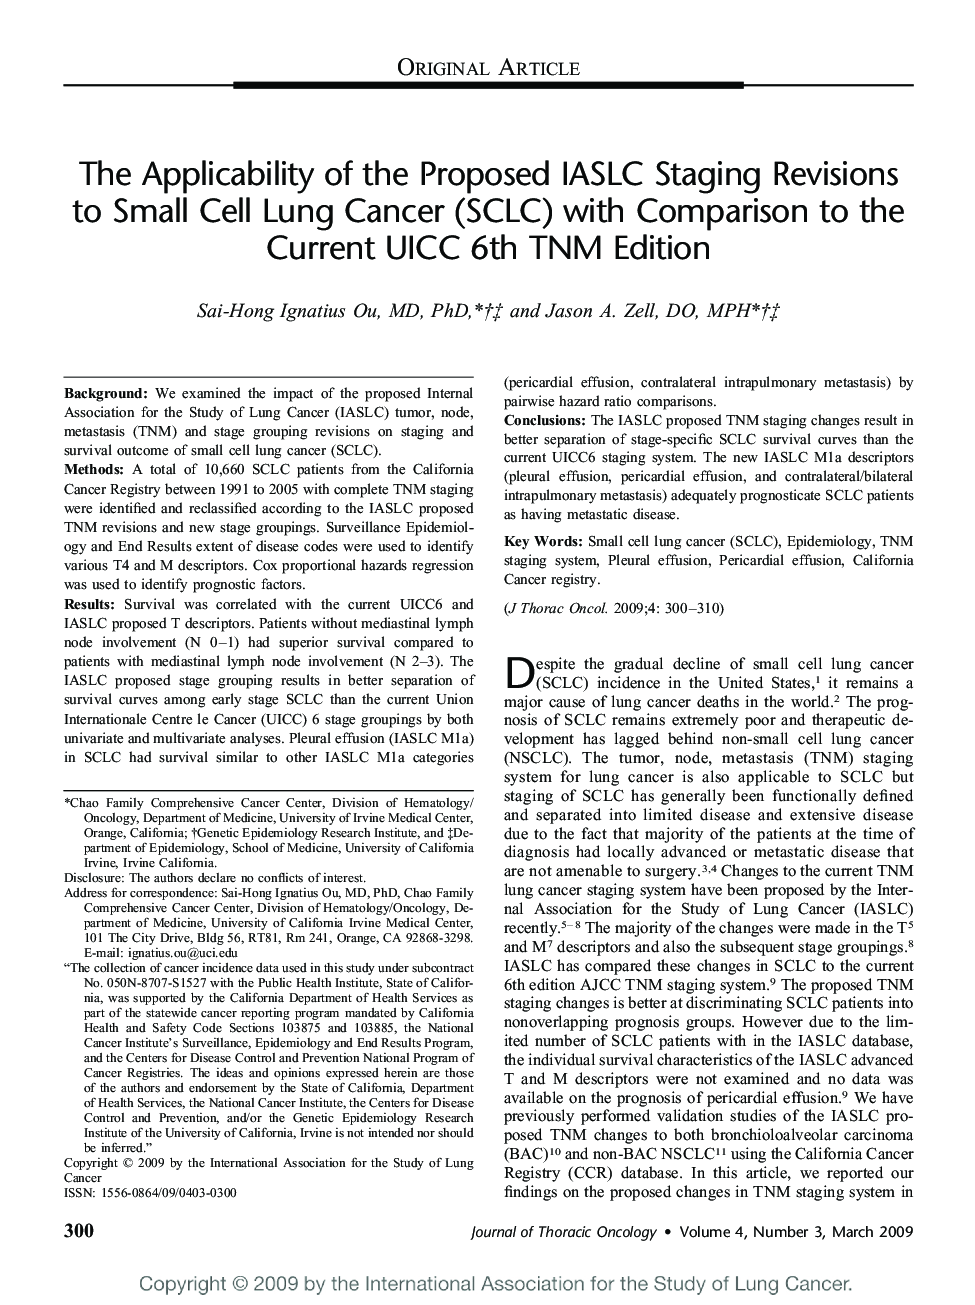 The Applicability of the Proposed IASLC Staging Revisions to Small Cell Lung Cancer (SCLC) with Comparison to the Current UICC 6th TNM Edition 